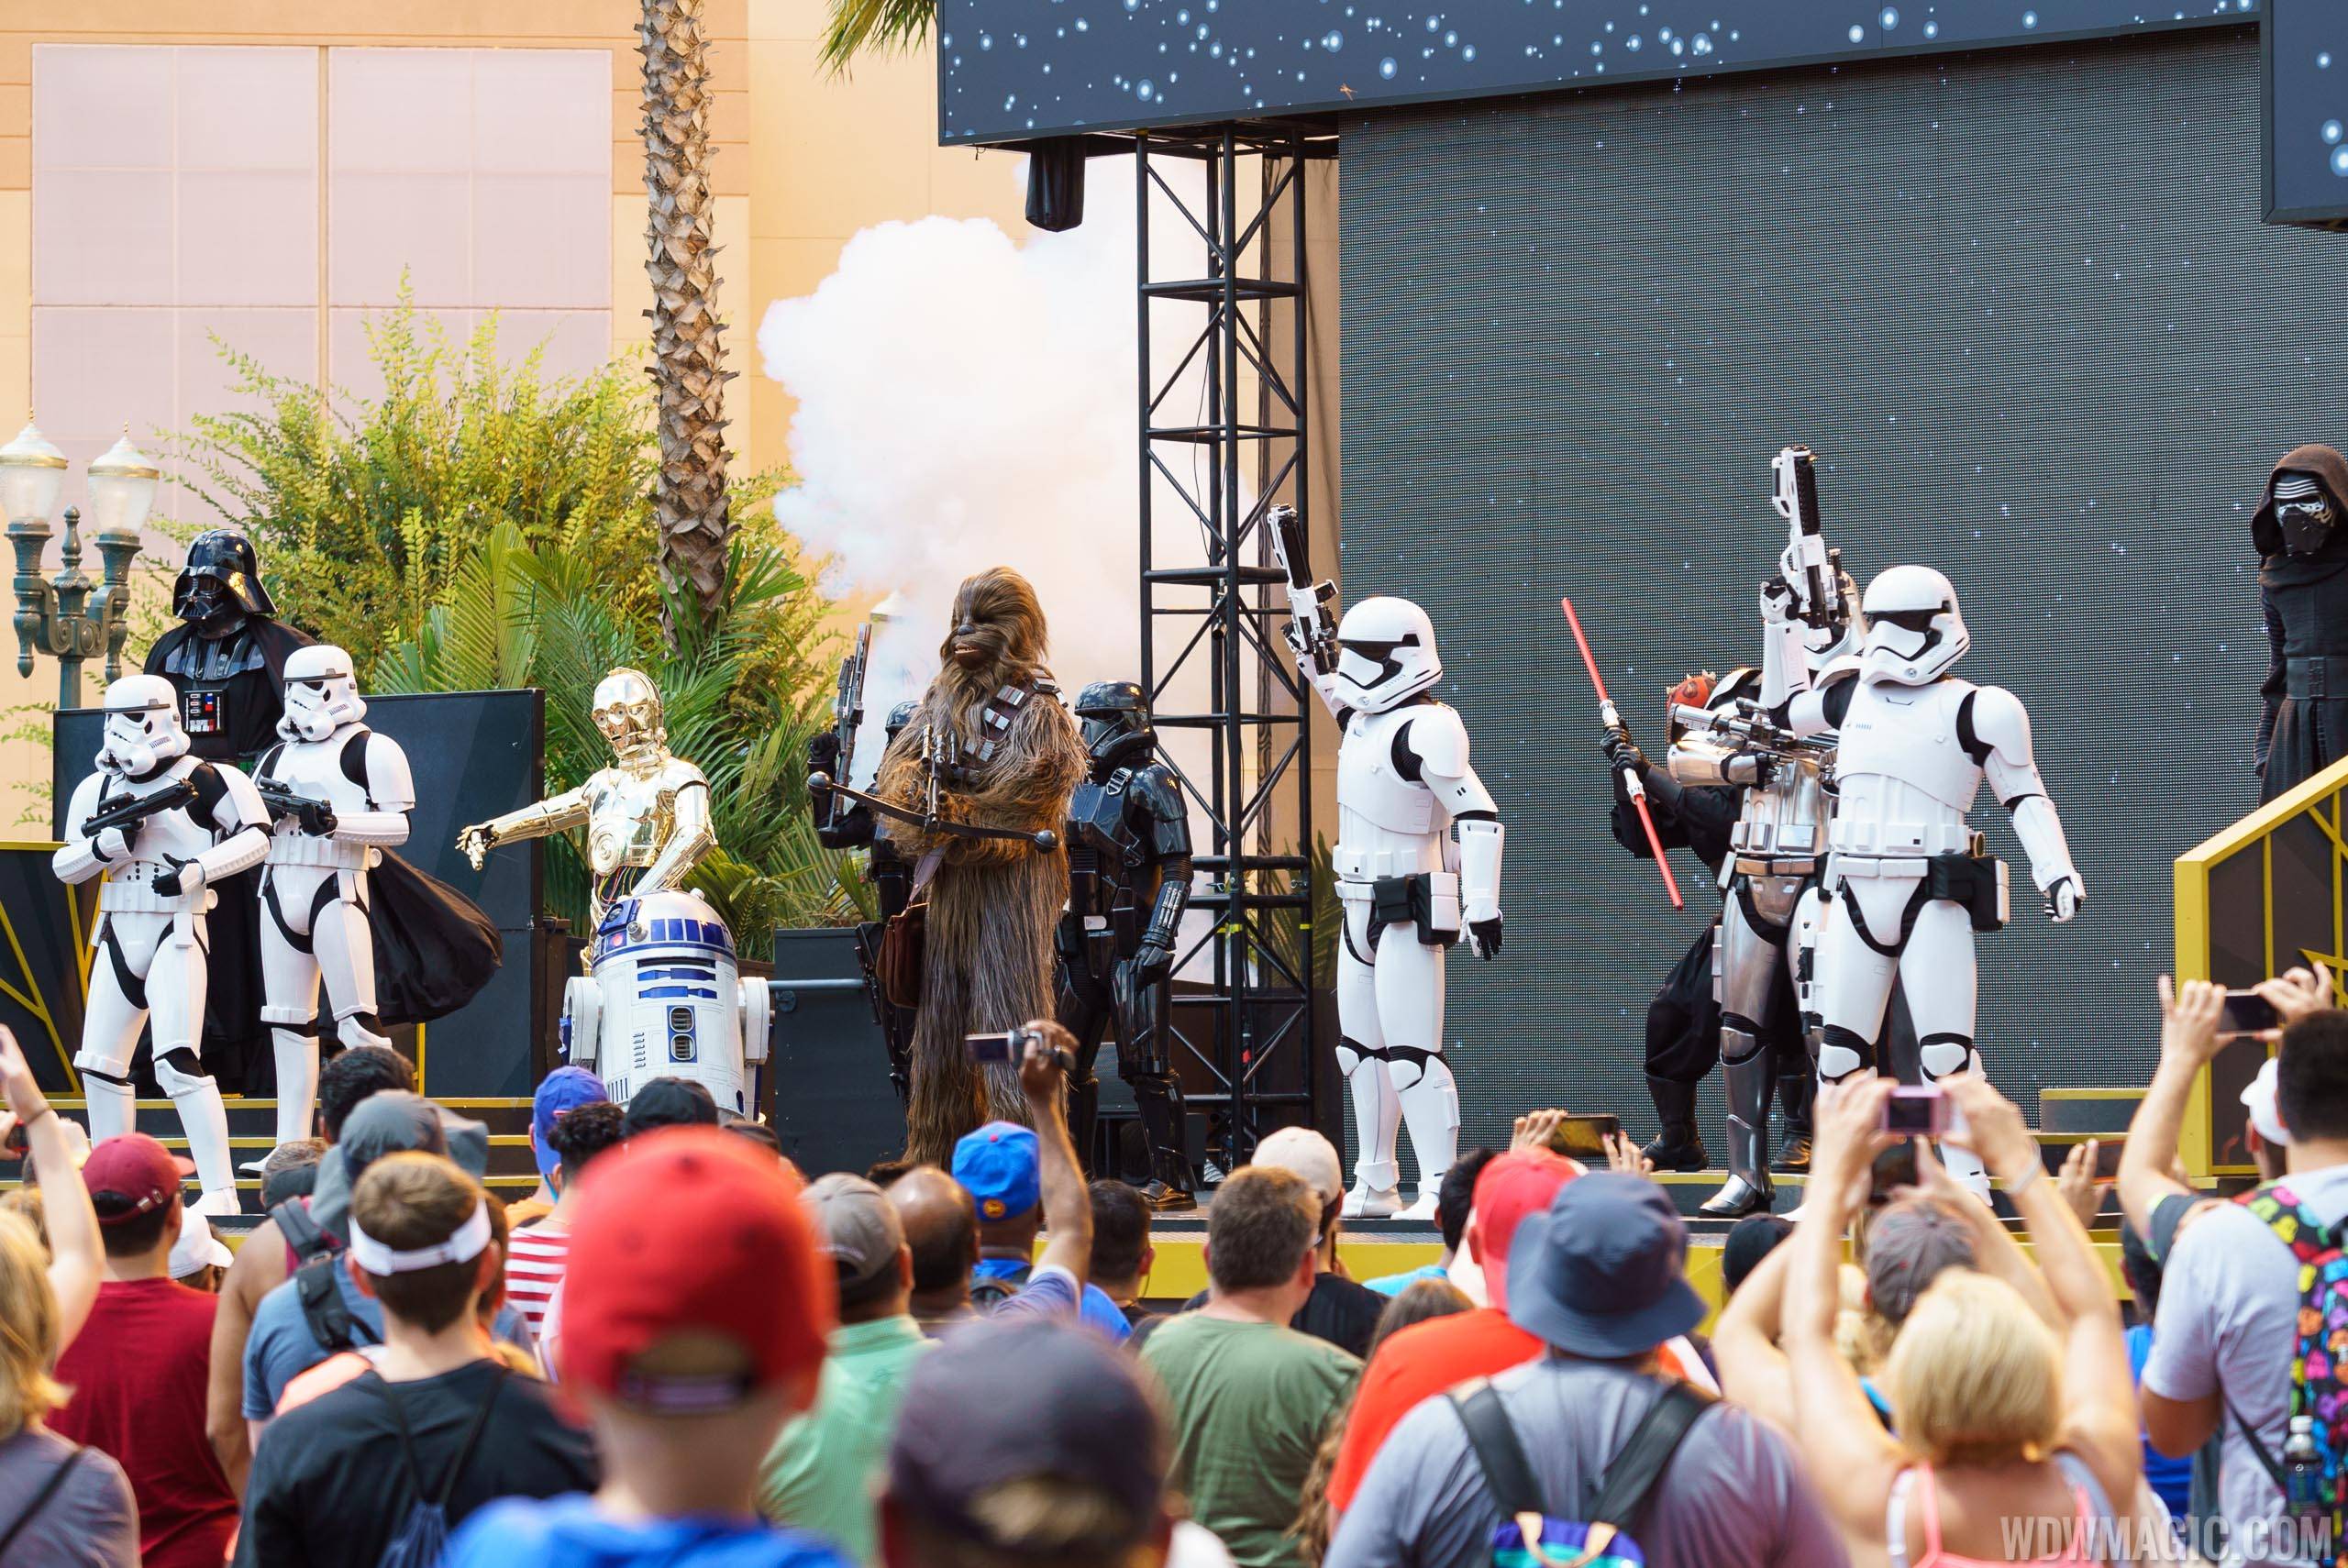 Star Wars A Galaxy Far, Far Away to close for mobile stage introduction